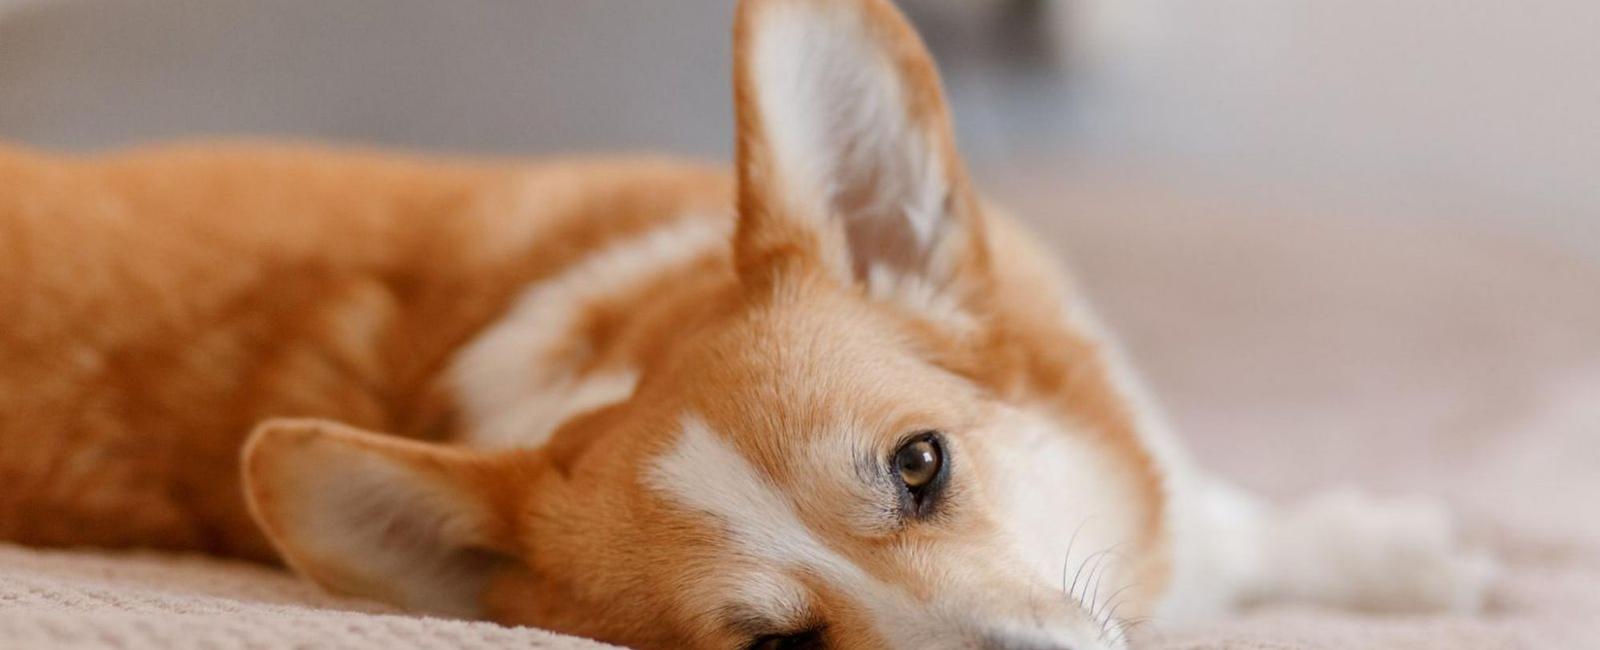 Couch-Potatoes: Why Your Dog Does Nothing All Day & What to Do About It